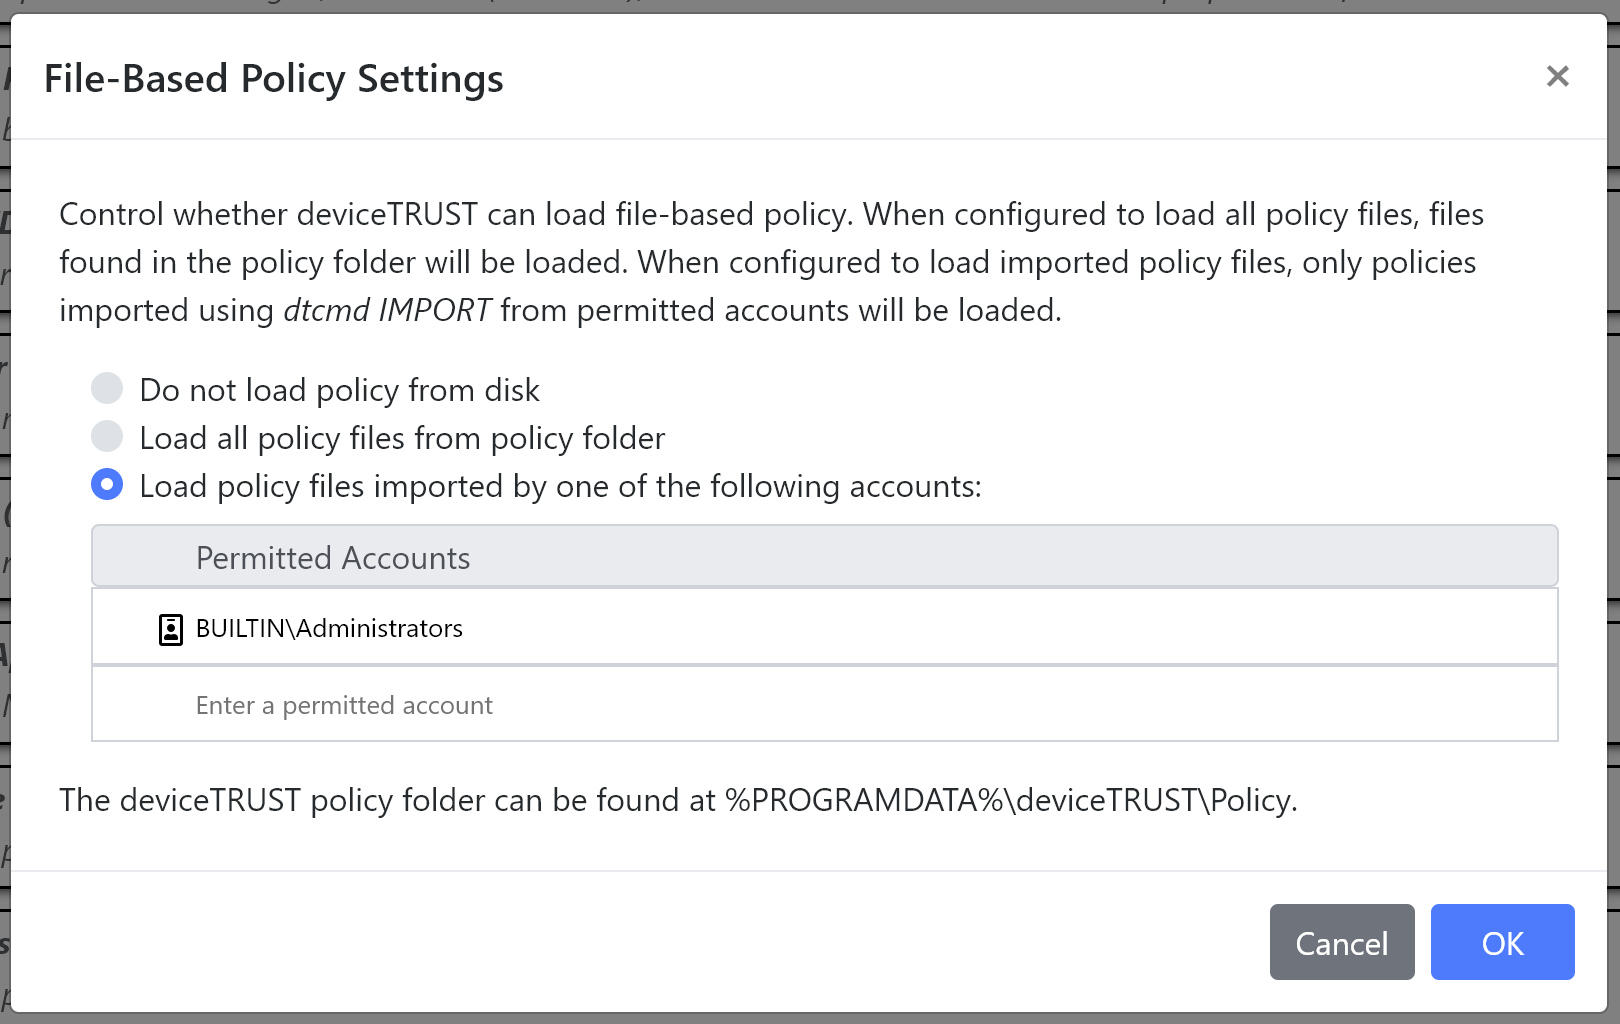 File-Based Policy Settings